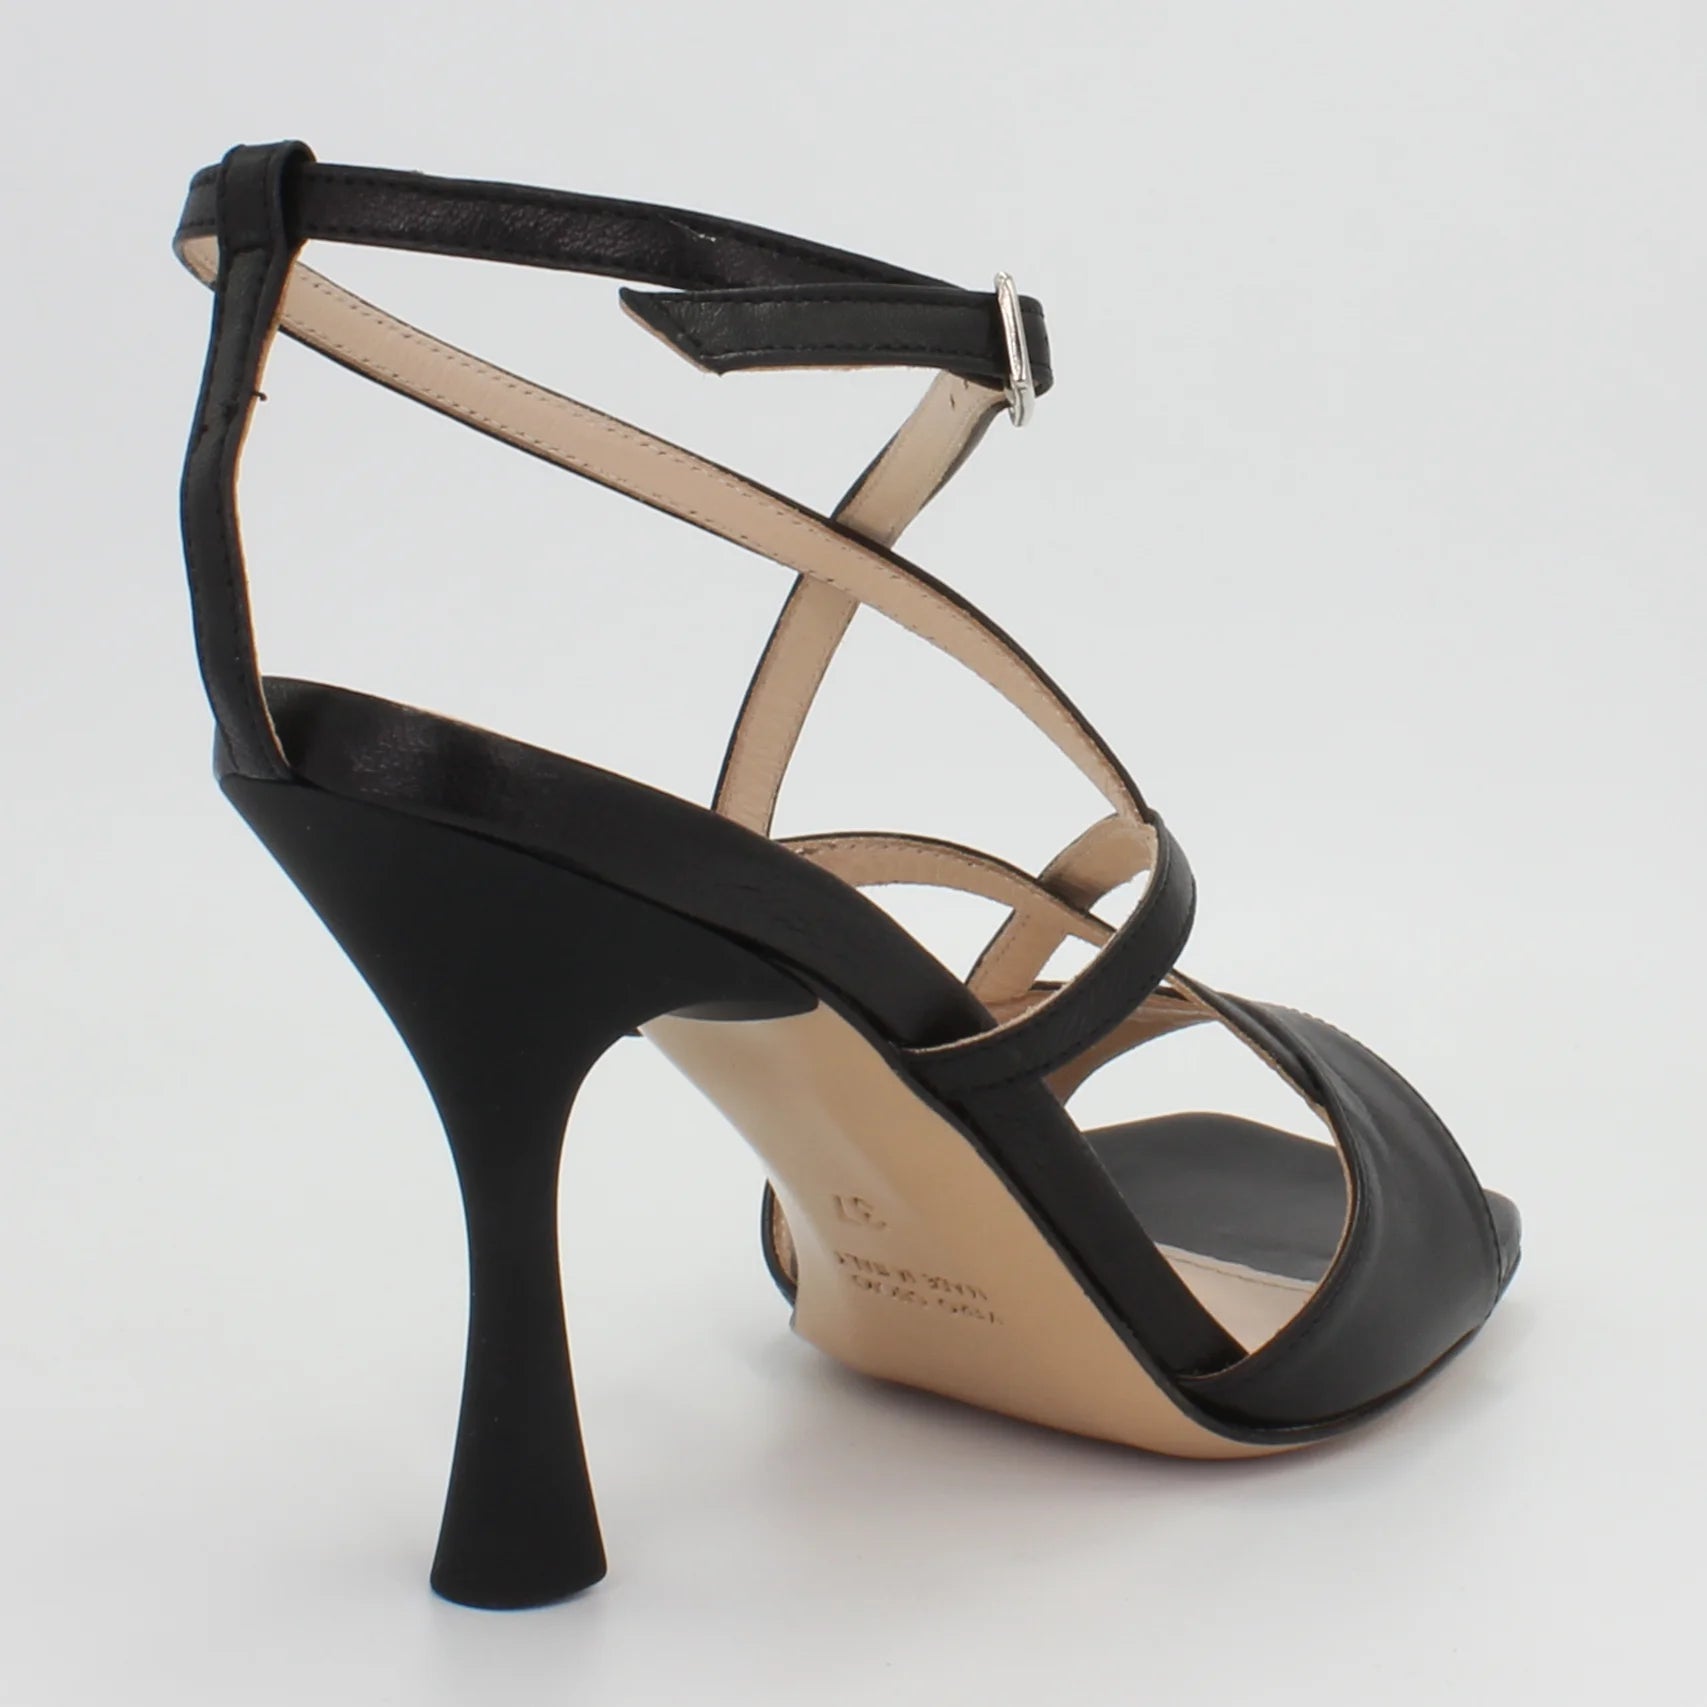 Shop Handmade Italian Leather Strappy High Heels in Nero (MP26102) or browse our range of hand-made Italian shoes for women in leather or suede in-store at Aliverti Cape Town, or shop online. We deliver in South Africa & offer multiple payment plans as well as accept multiple safe & secure payment methods.